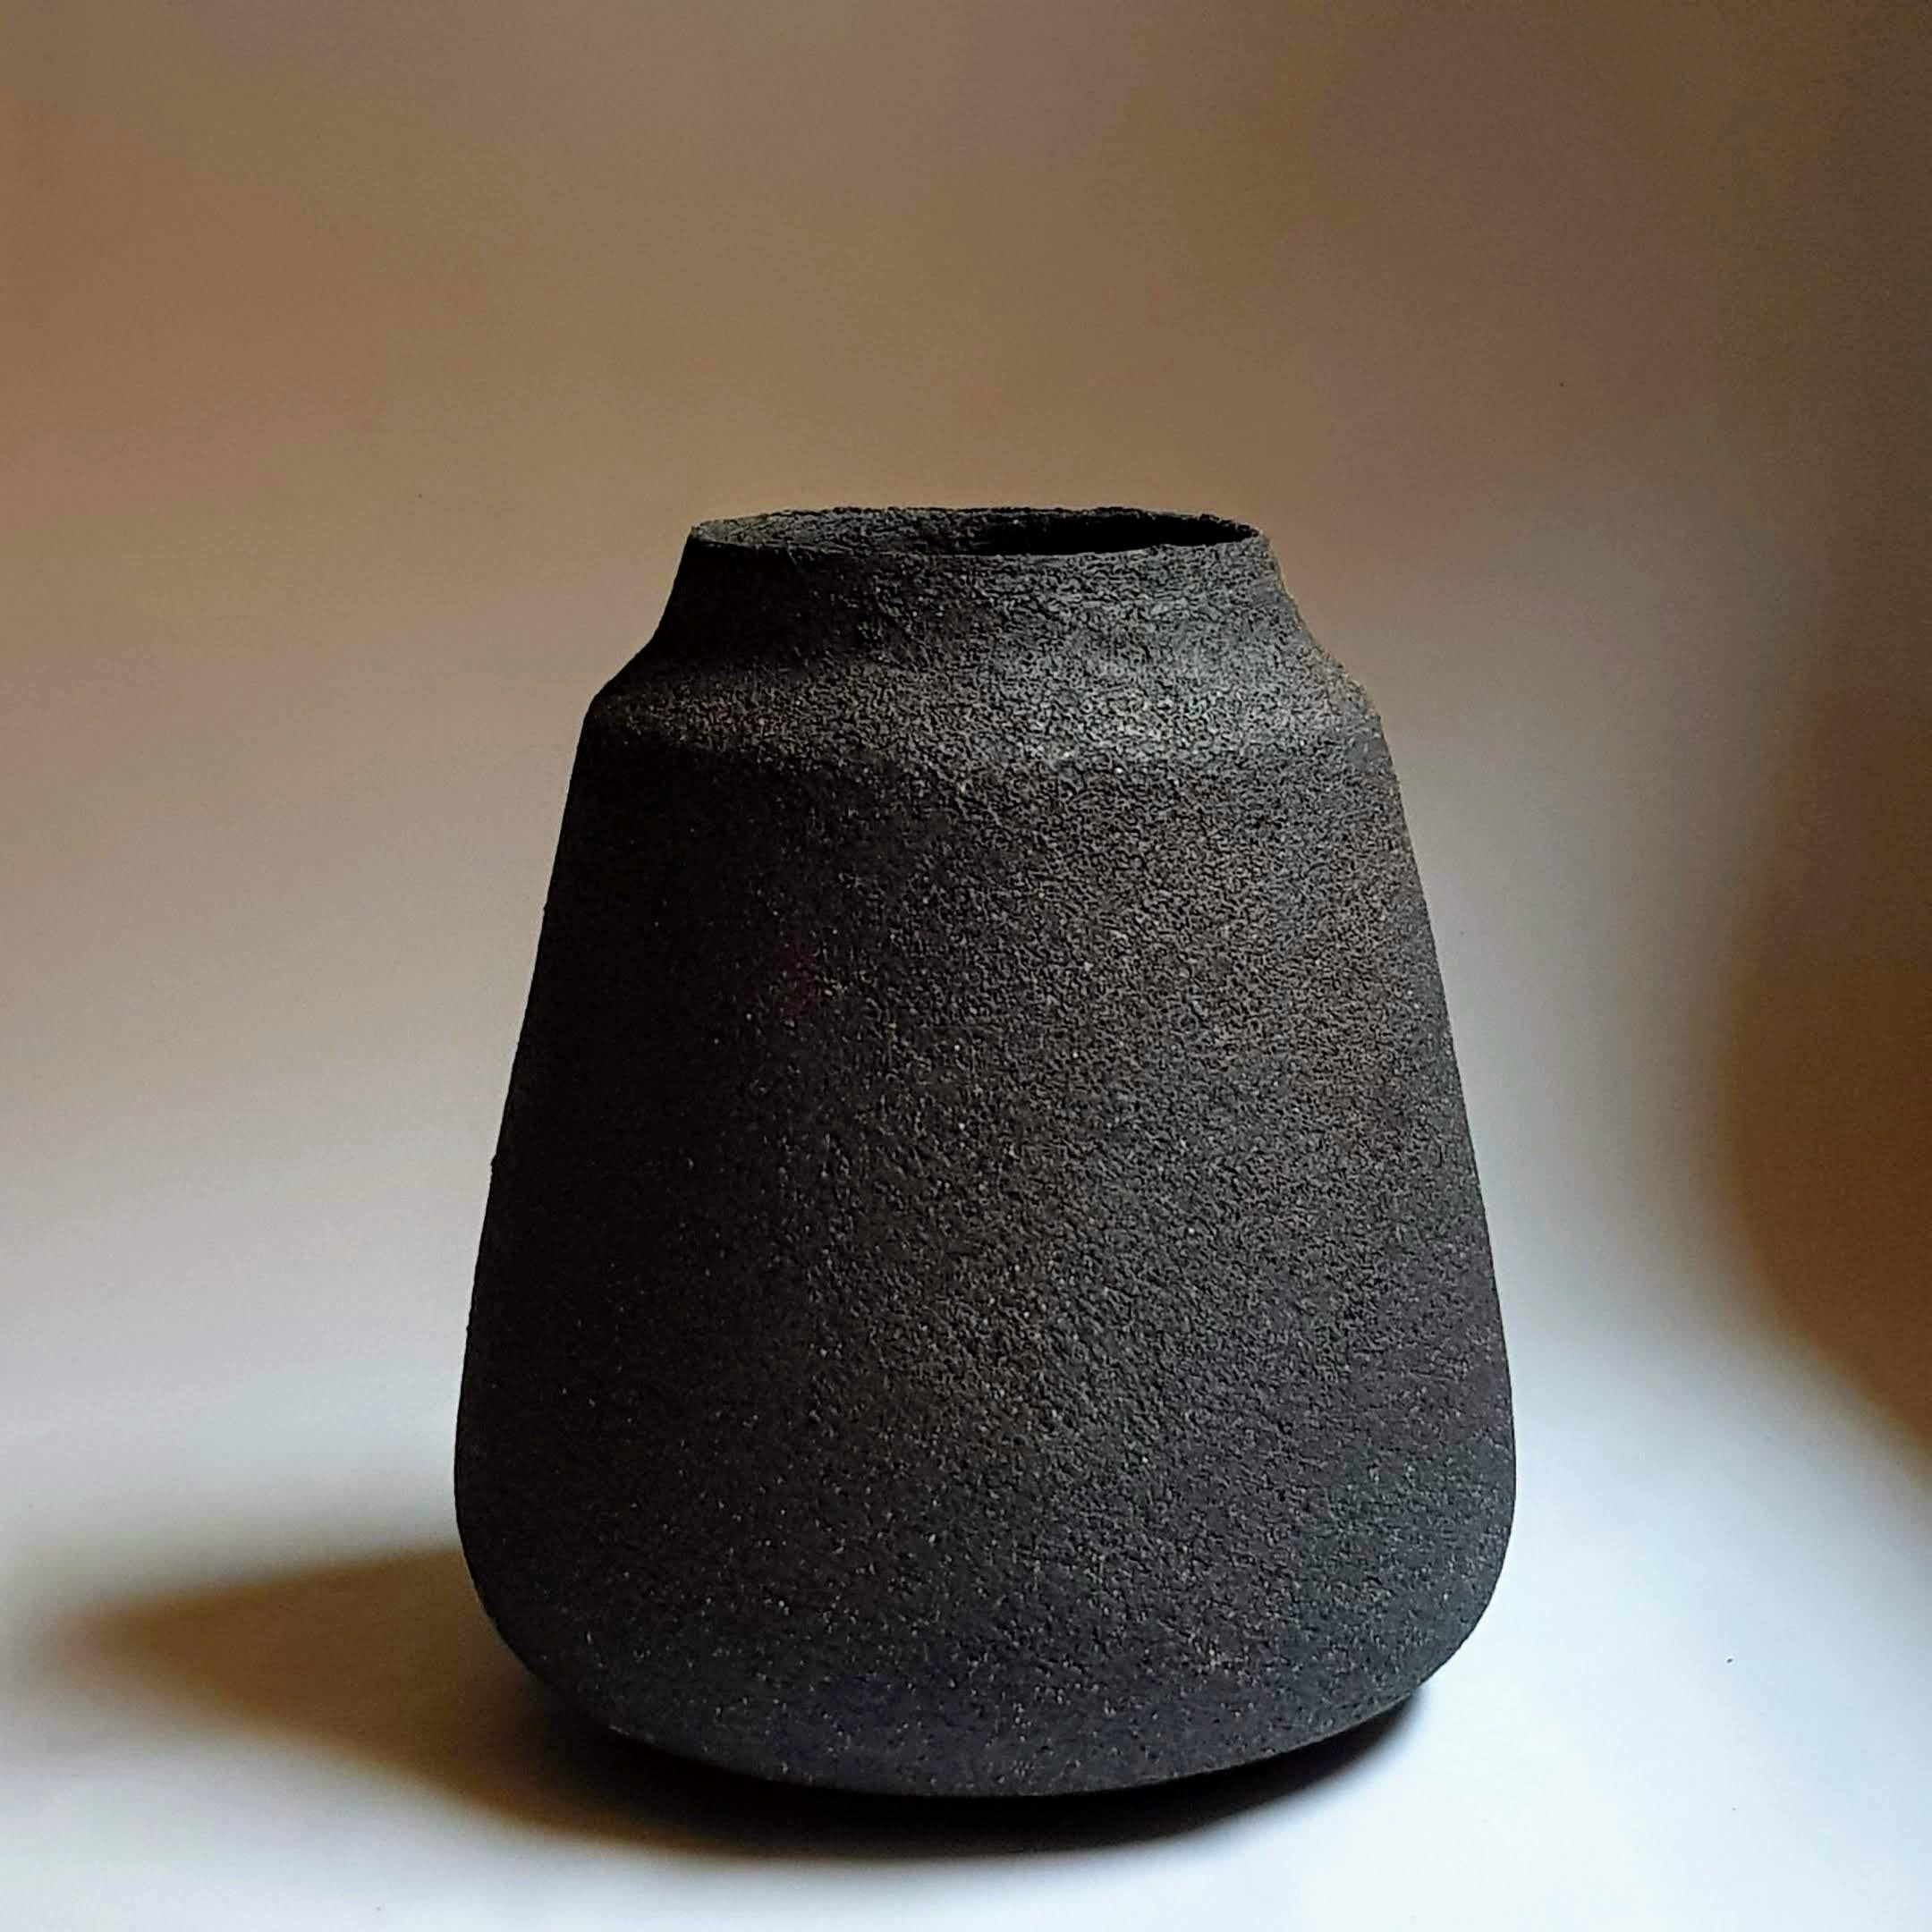 Black Stoneware Kados Vase by Elena Vasilantonaki
Unique
Dimensions: ⌀ 30 x H 25 cm (Dimensions may vary)
Materials: Stoneware
Available finishes: Black, White, Grey, Brown, Red, White Patina

Growing up in Greece I was surrounded by pottery forms